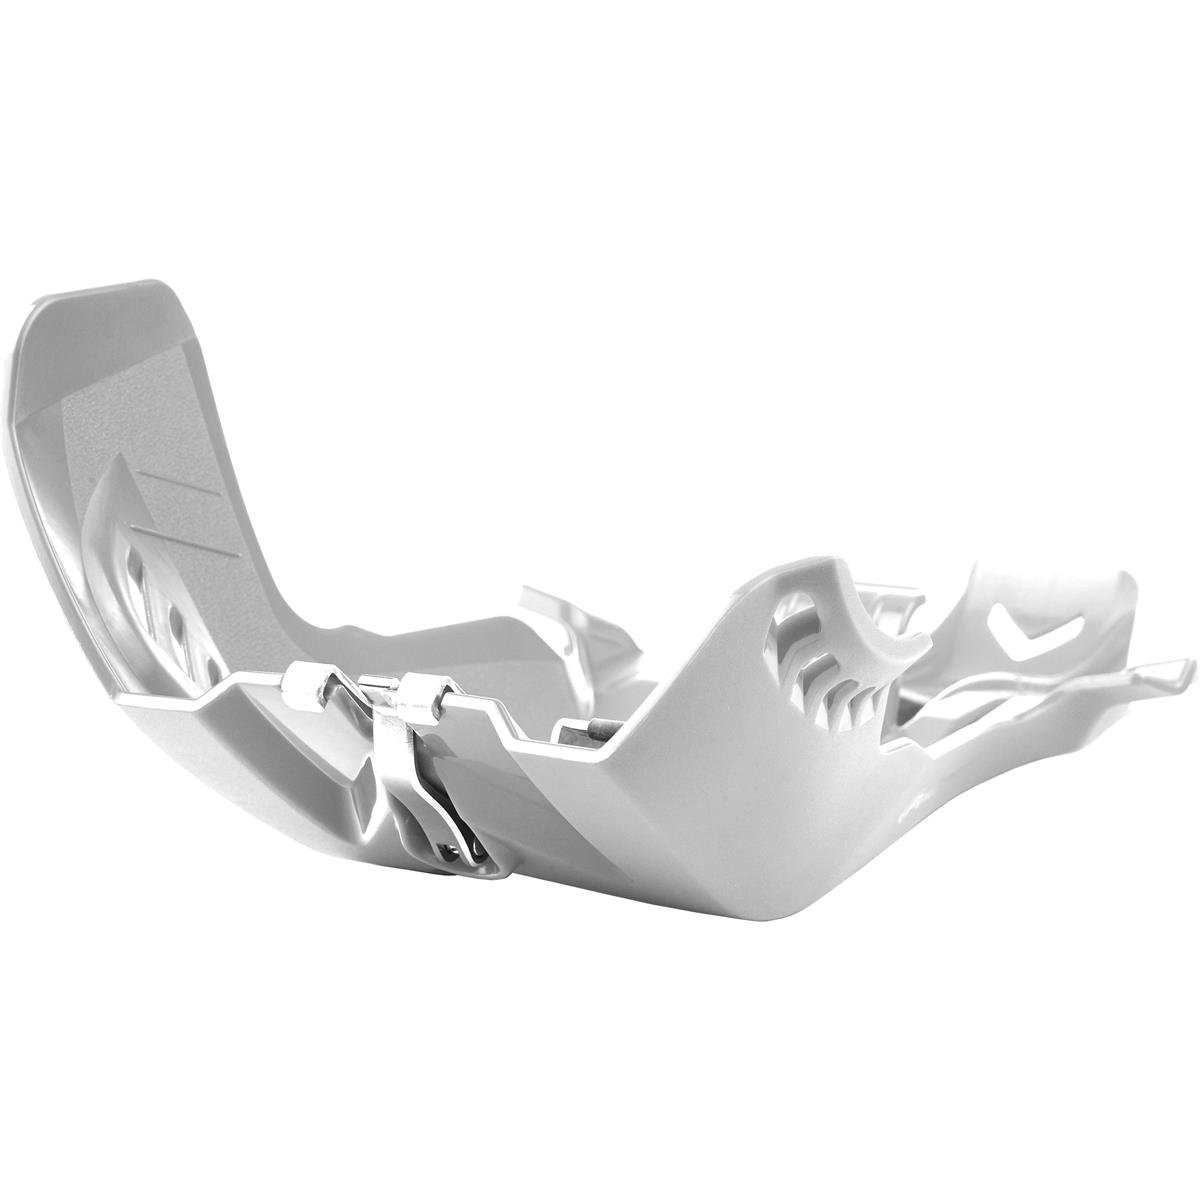 Polisport Skid plate with deflection protection Fortress KTM SX 250 19-20, Husqvarna TC 250 19-20, White